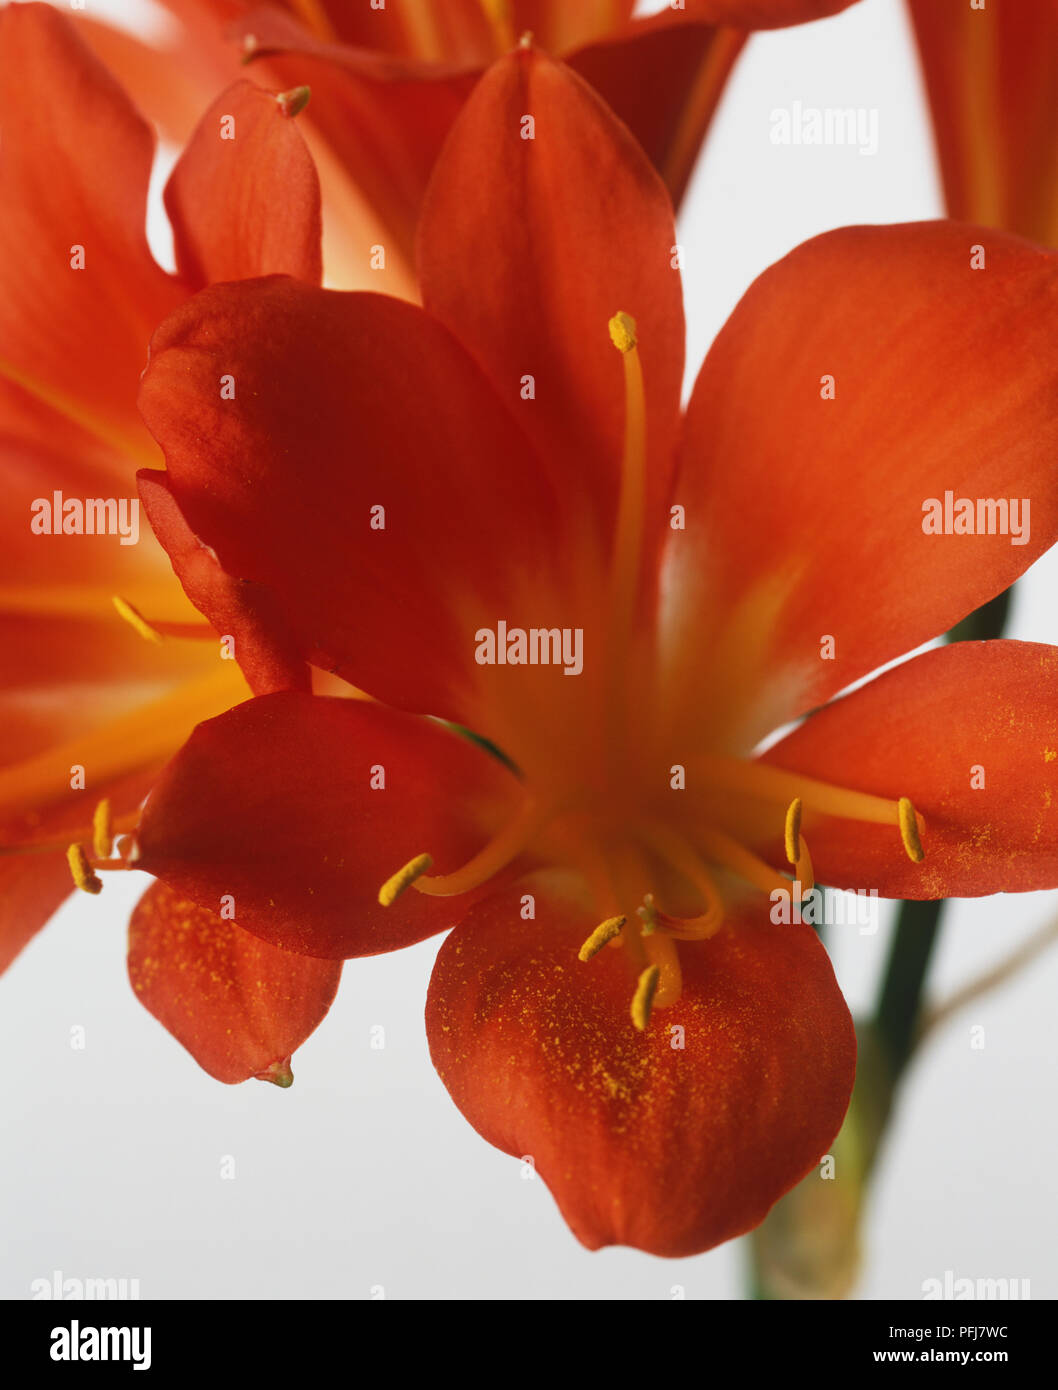 Kaffir Lily (Clivia miniata), flower of robust evergreen, showing spindly yellow stamens at centre of orange-red petals, bursting anthers dusting petals with pollen, close-up Stock Photo